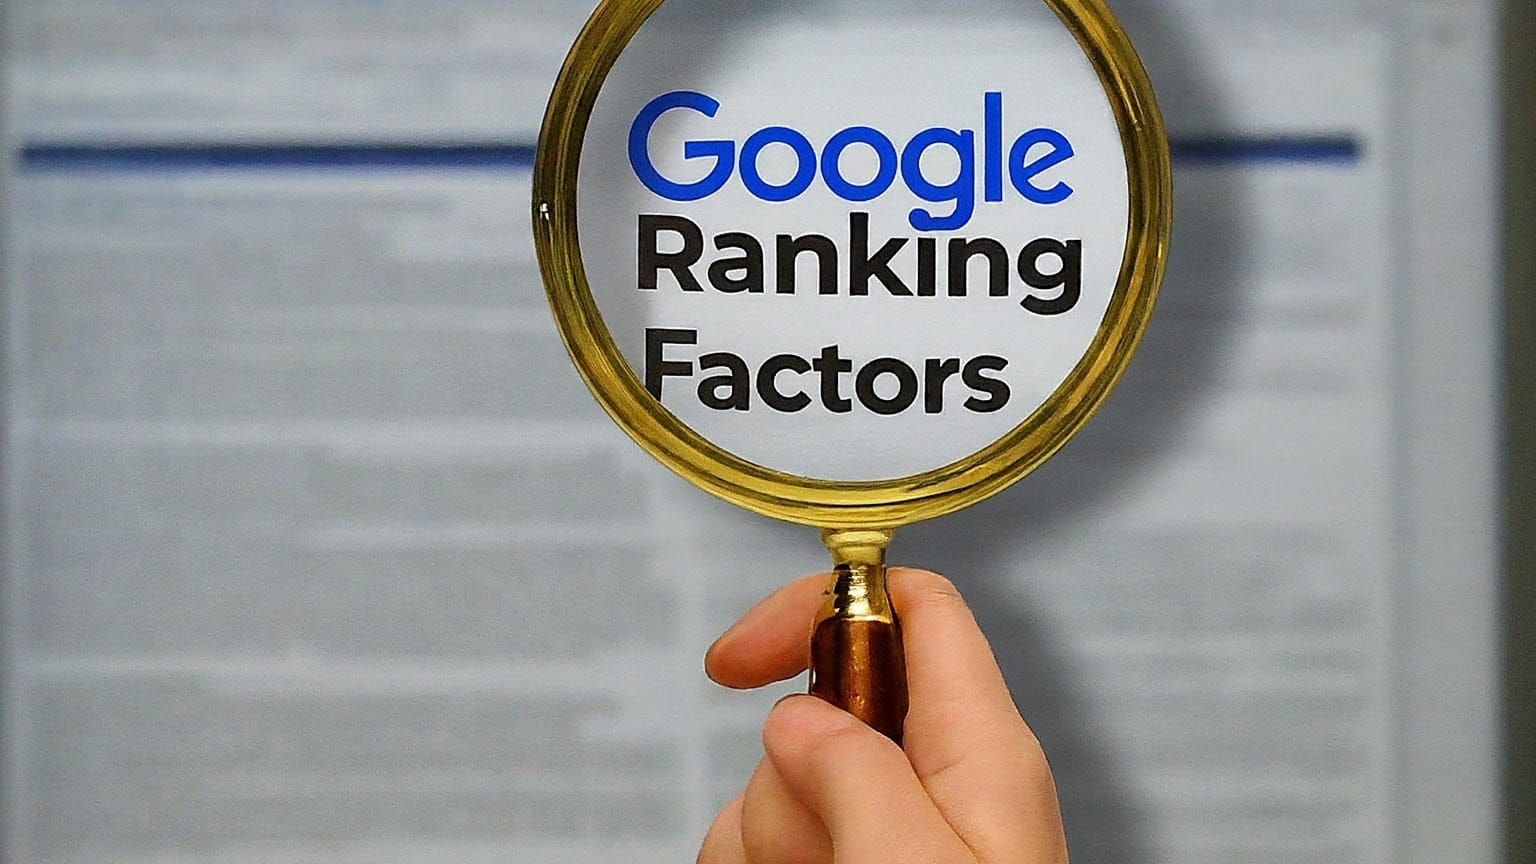 14,000+ Google Search Ranking Features Leaked